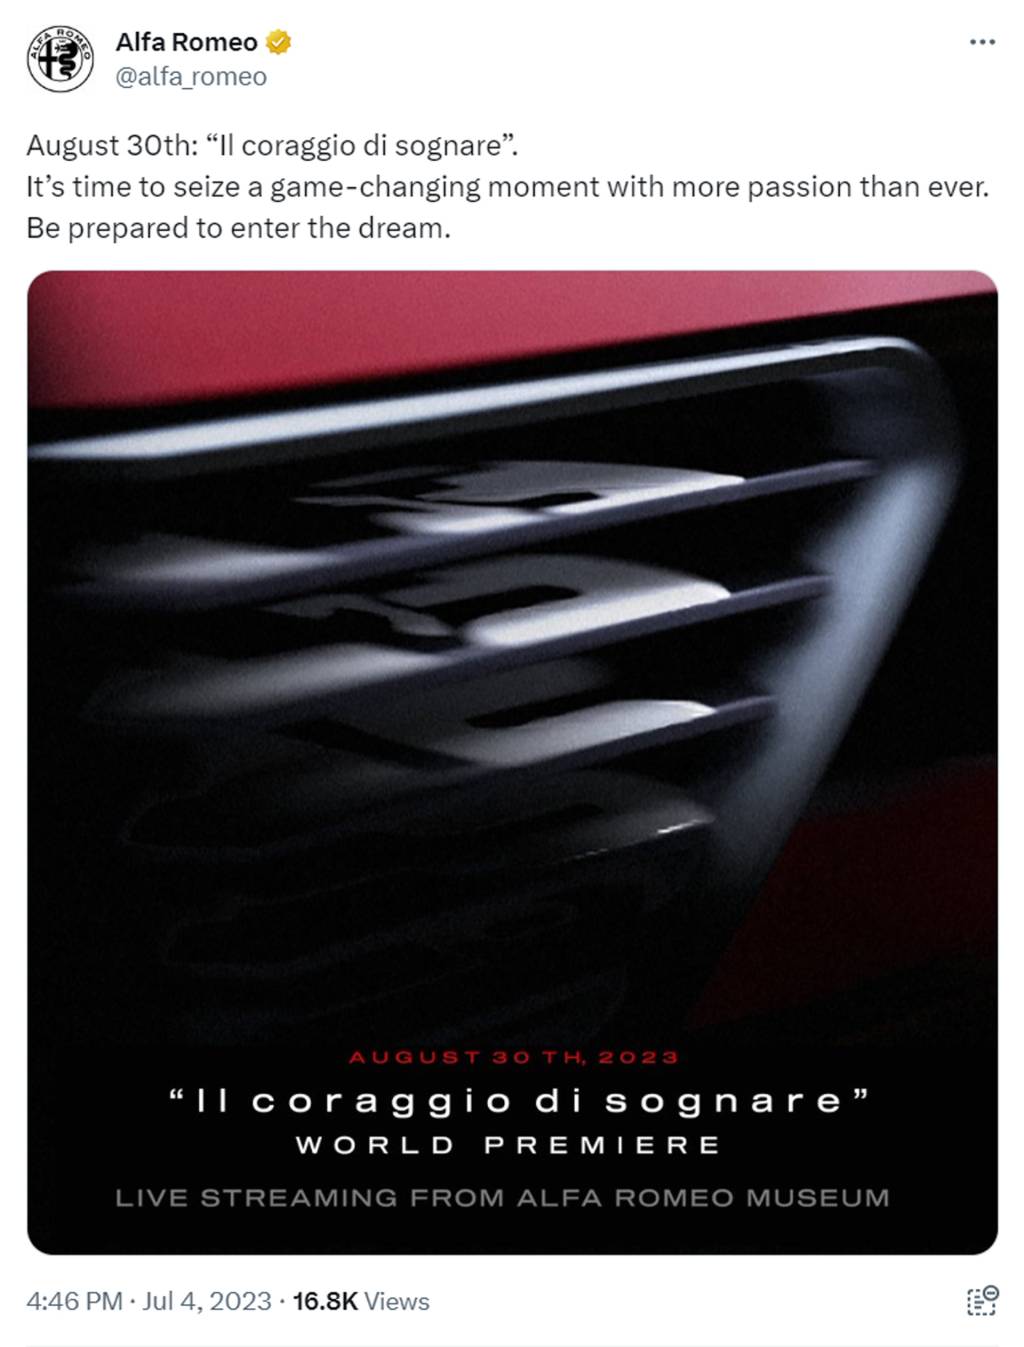 Twitter post made by Alfa Romeo on July 4, 2023